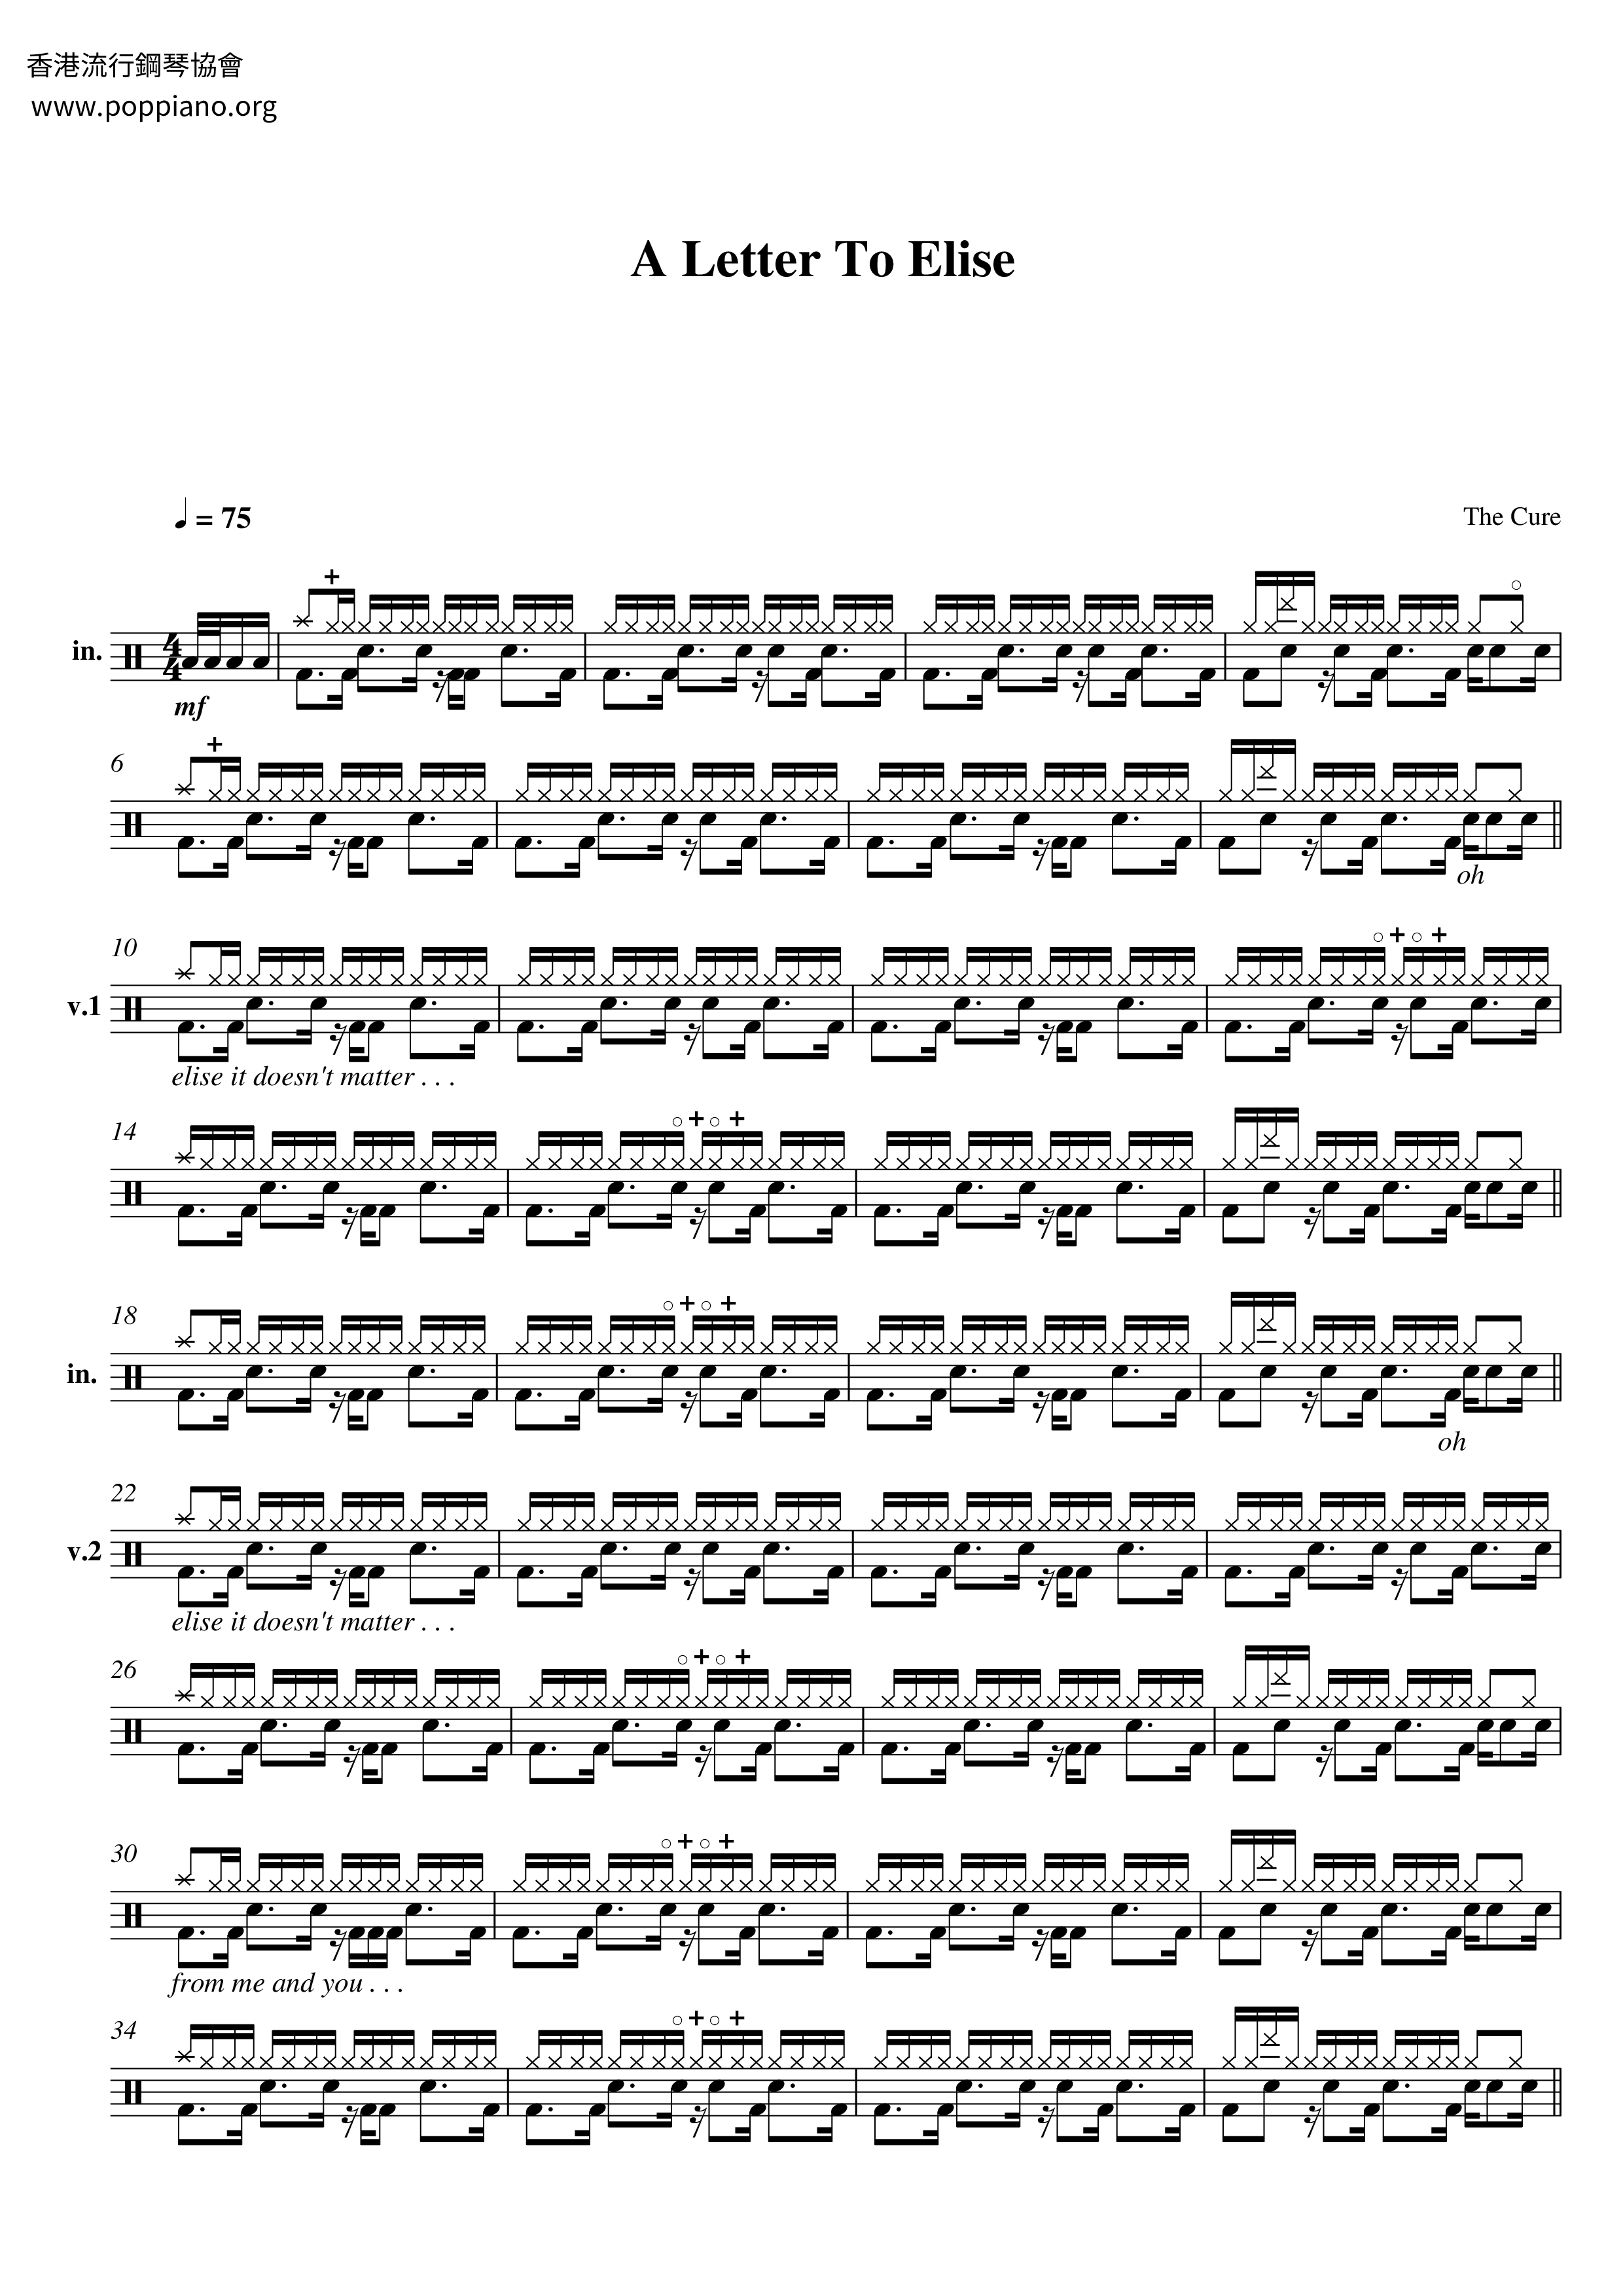 A Letter To Elise Score